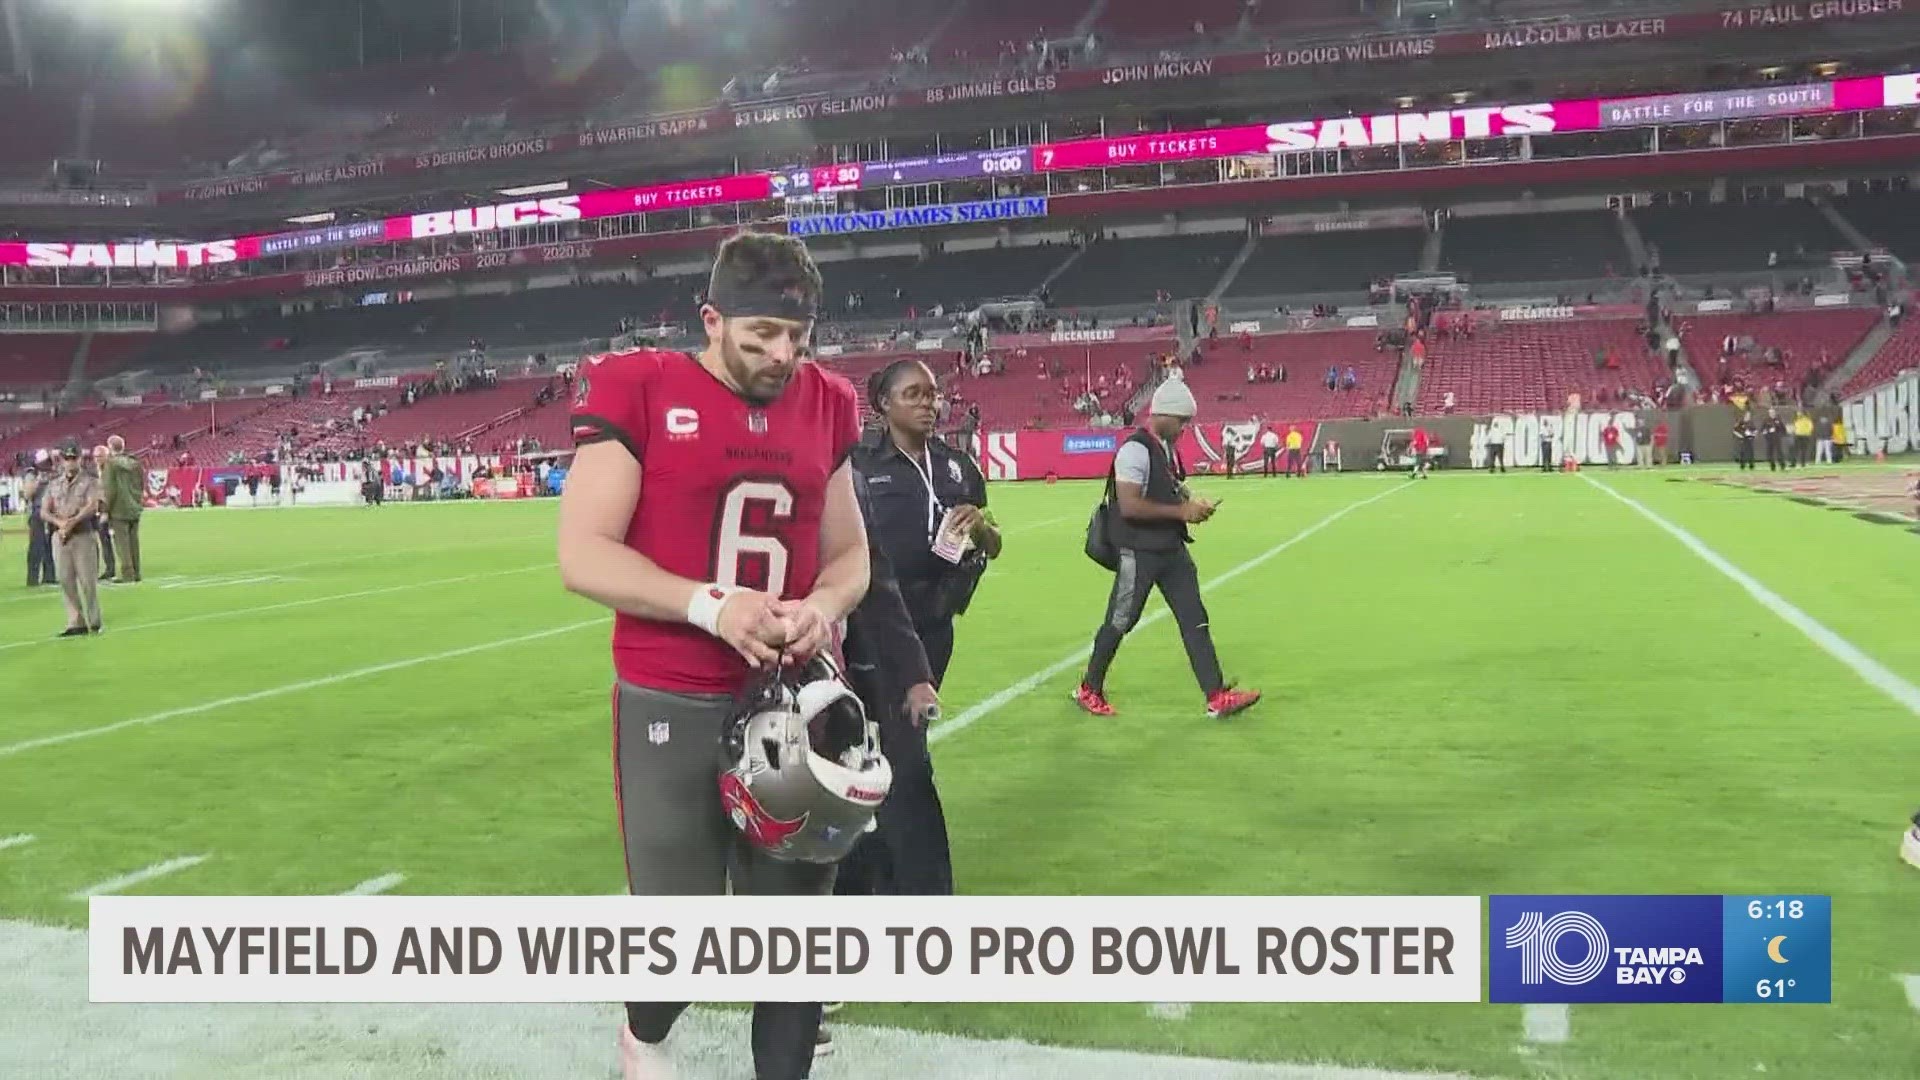 This is Baker Mayfield's first Pro Bowl selection and Tristan Wirfs' third consecutive.